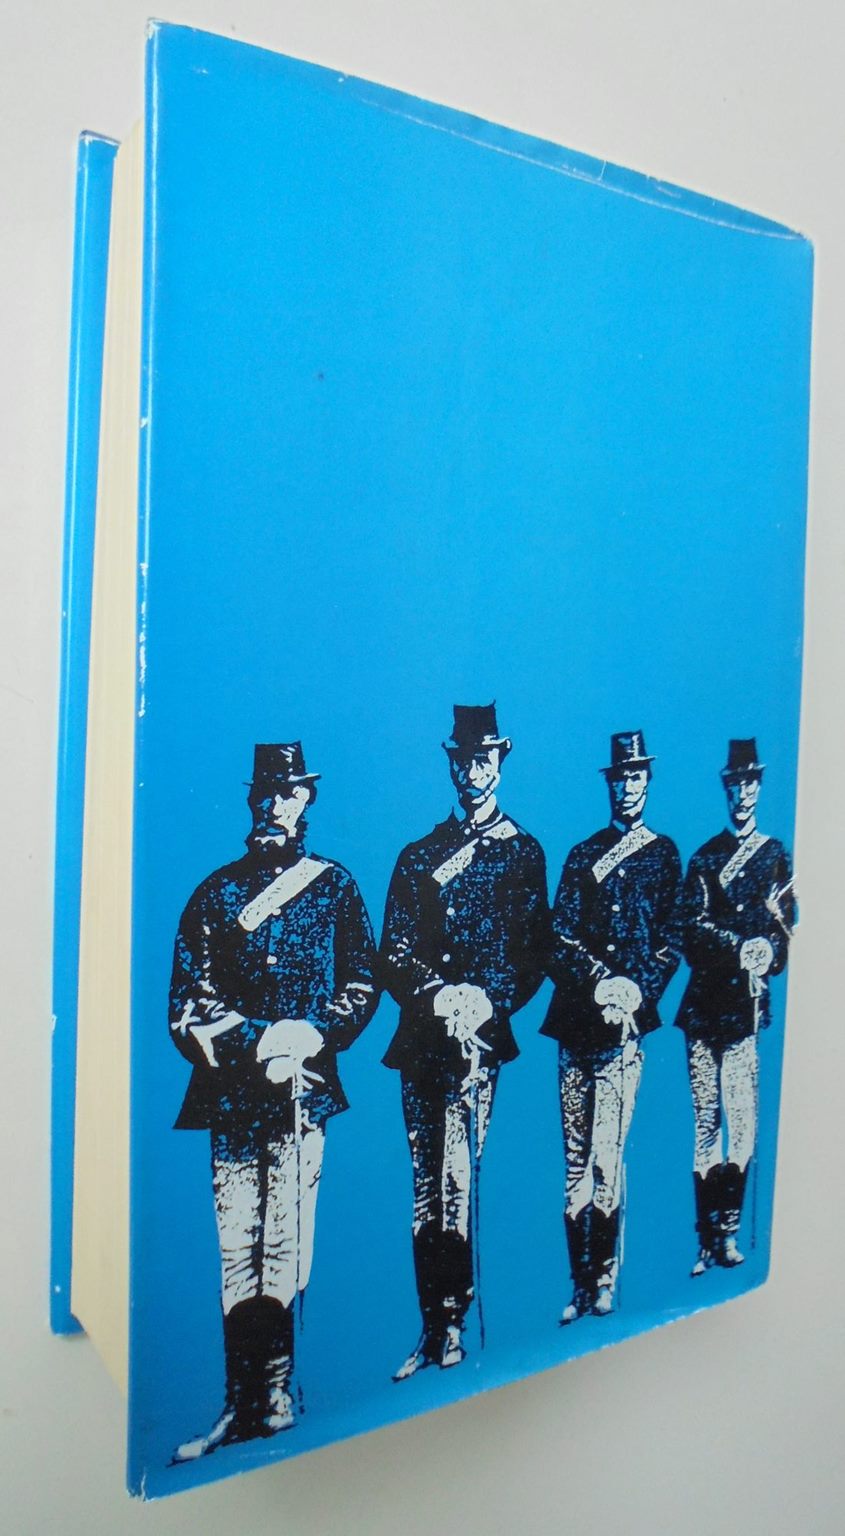 The History of Policing in New Zealand: Policing the Colonial Frontier 1767 - 1867. Vol 1 (Part 1 & 2).